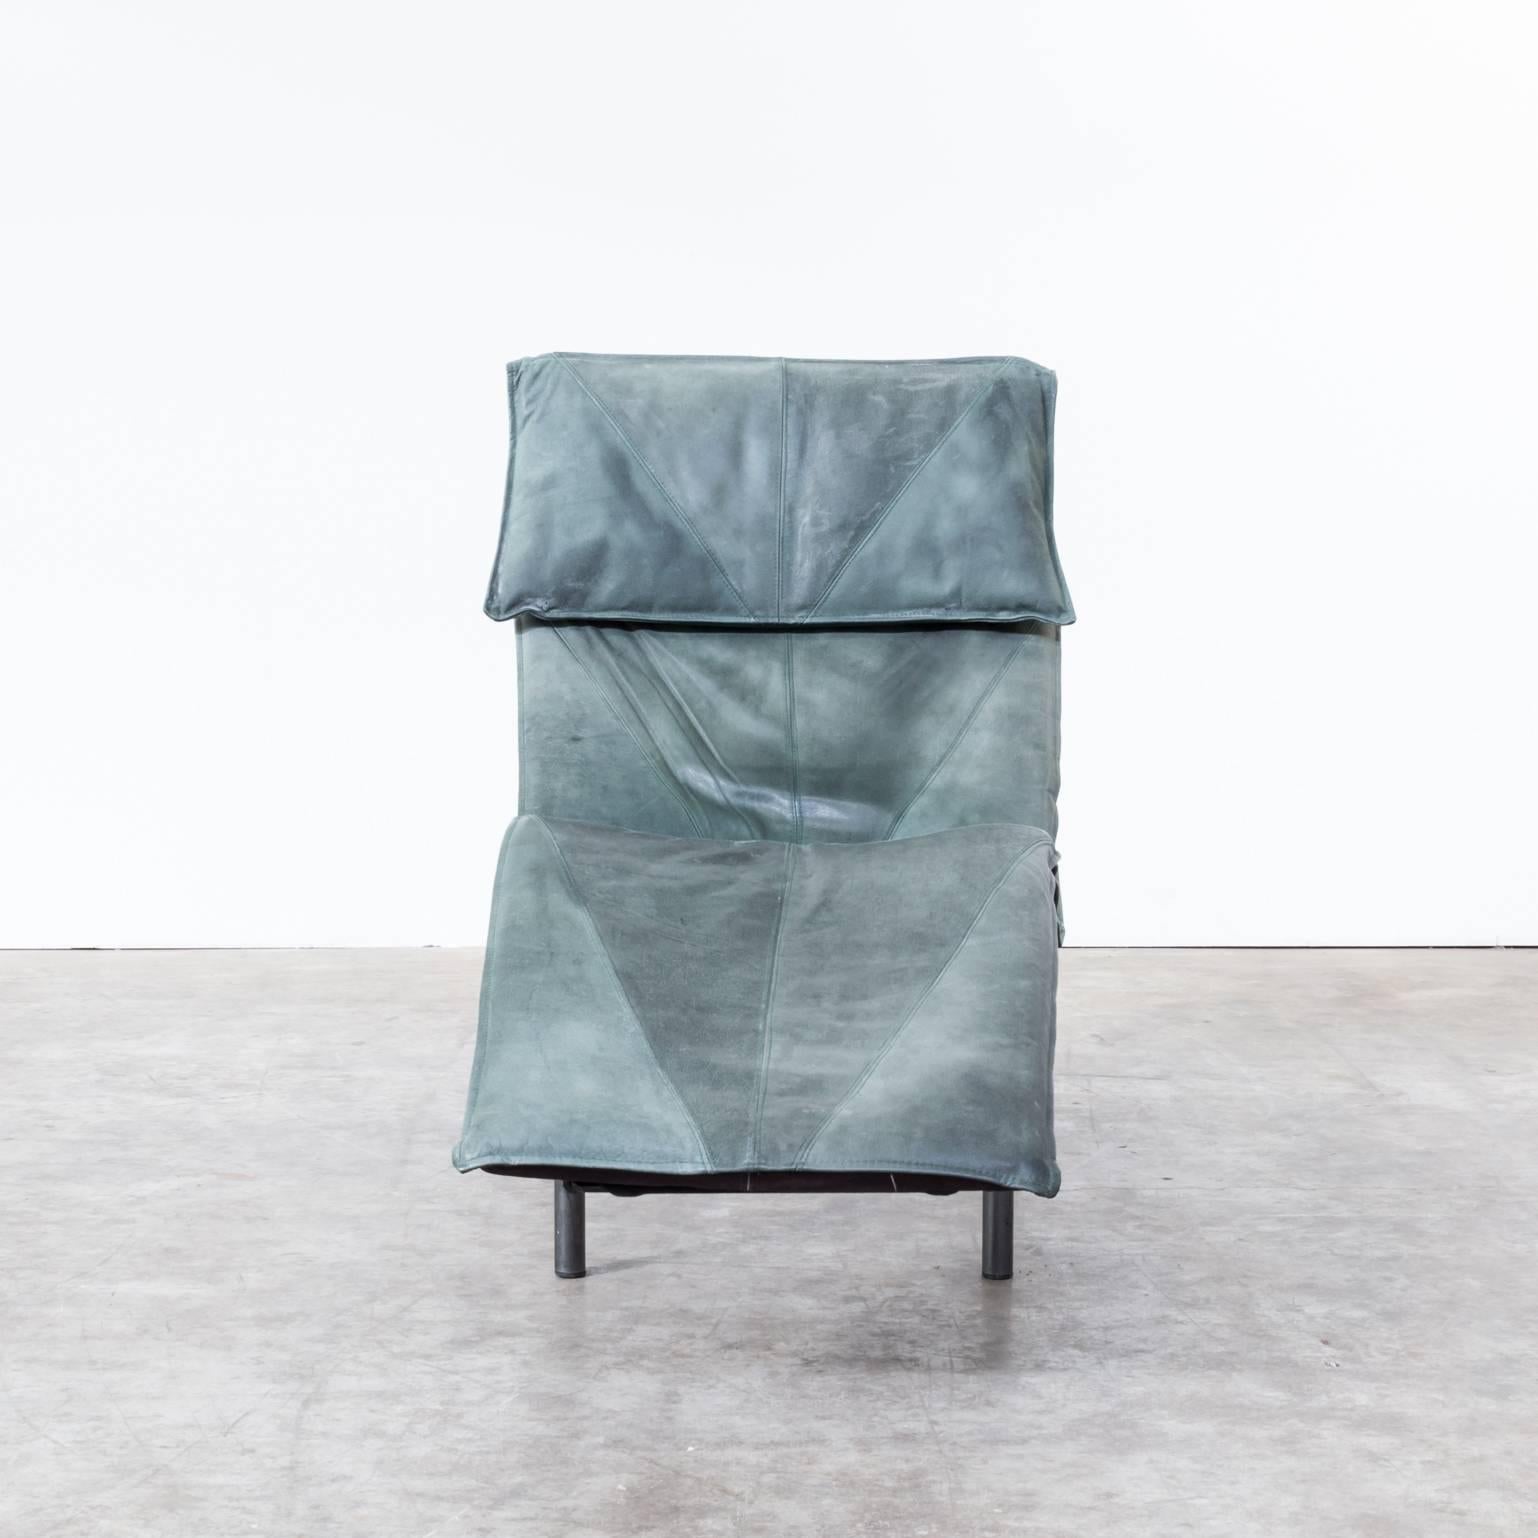 Tord Björklund ‘skye’ chaise longue chair leather. Beautiful patina on the forest green leather. Good condition, consistent with age and use.